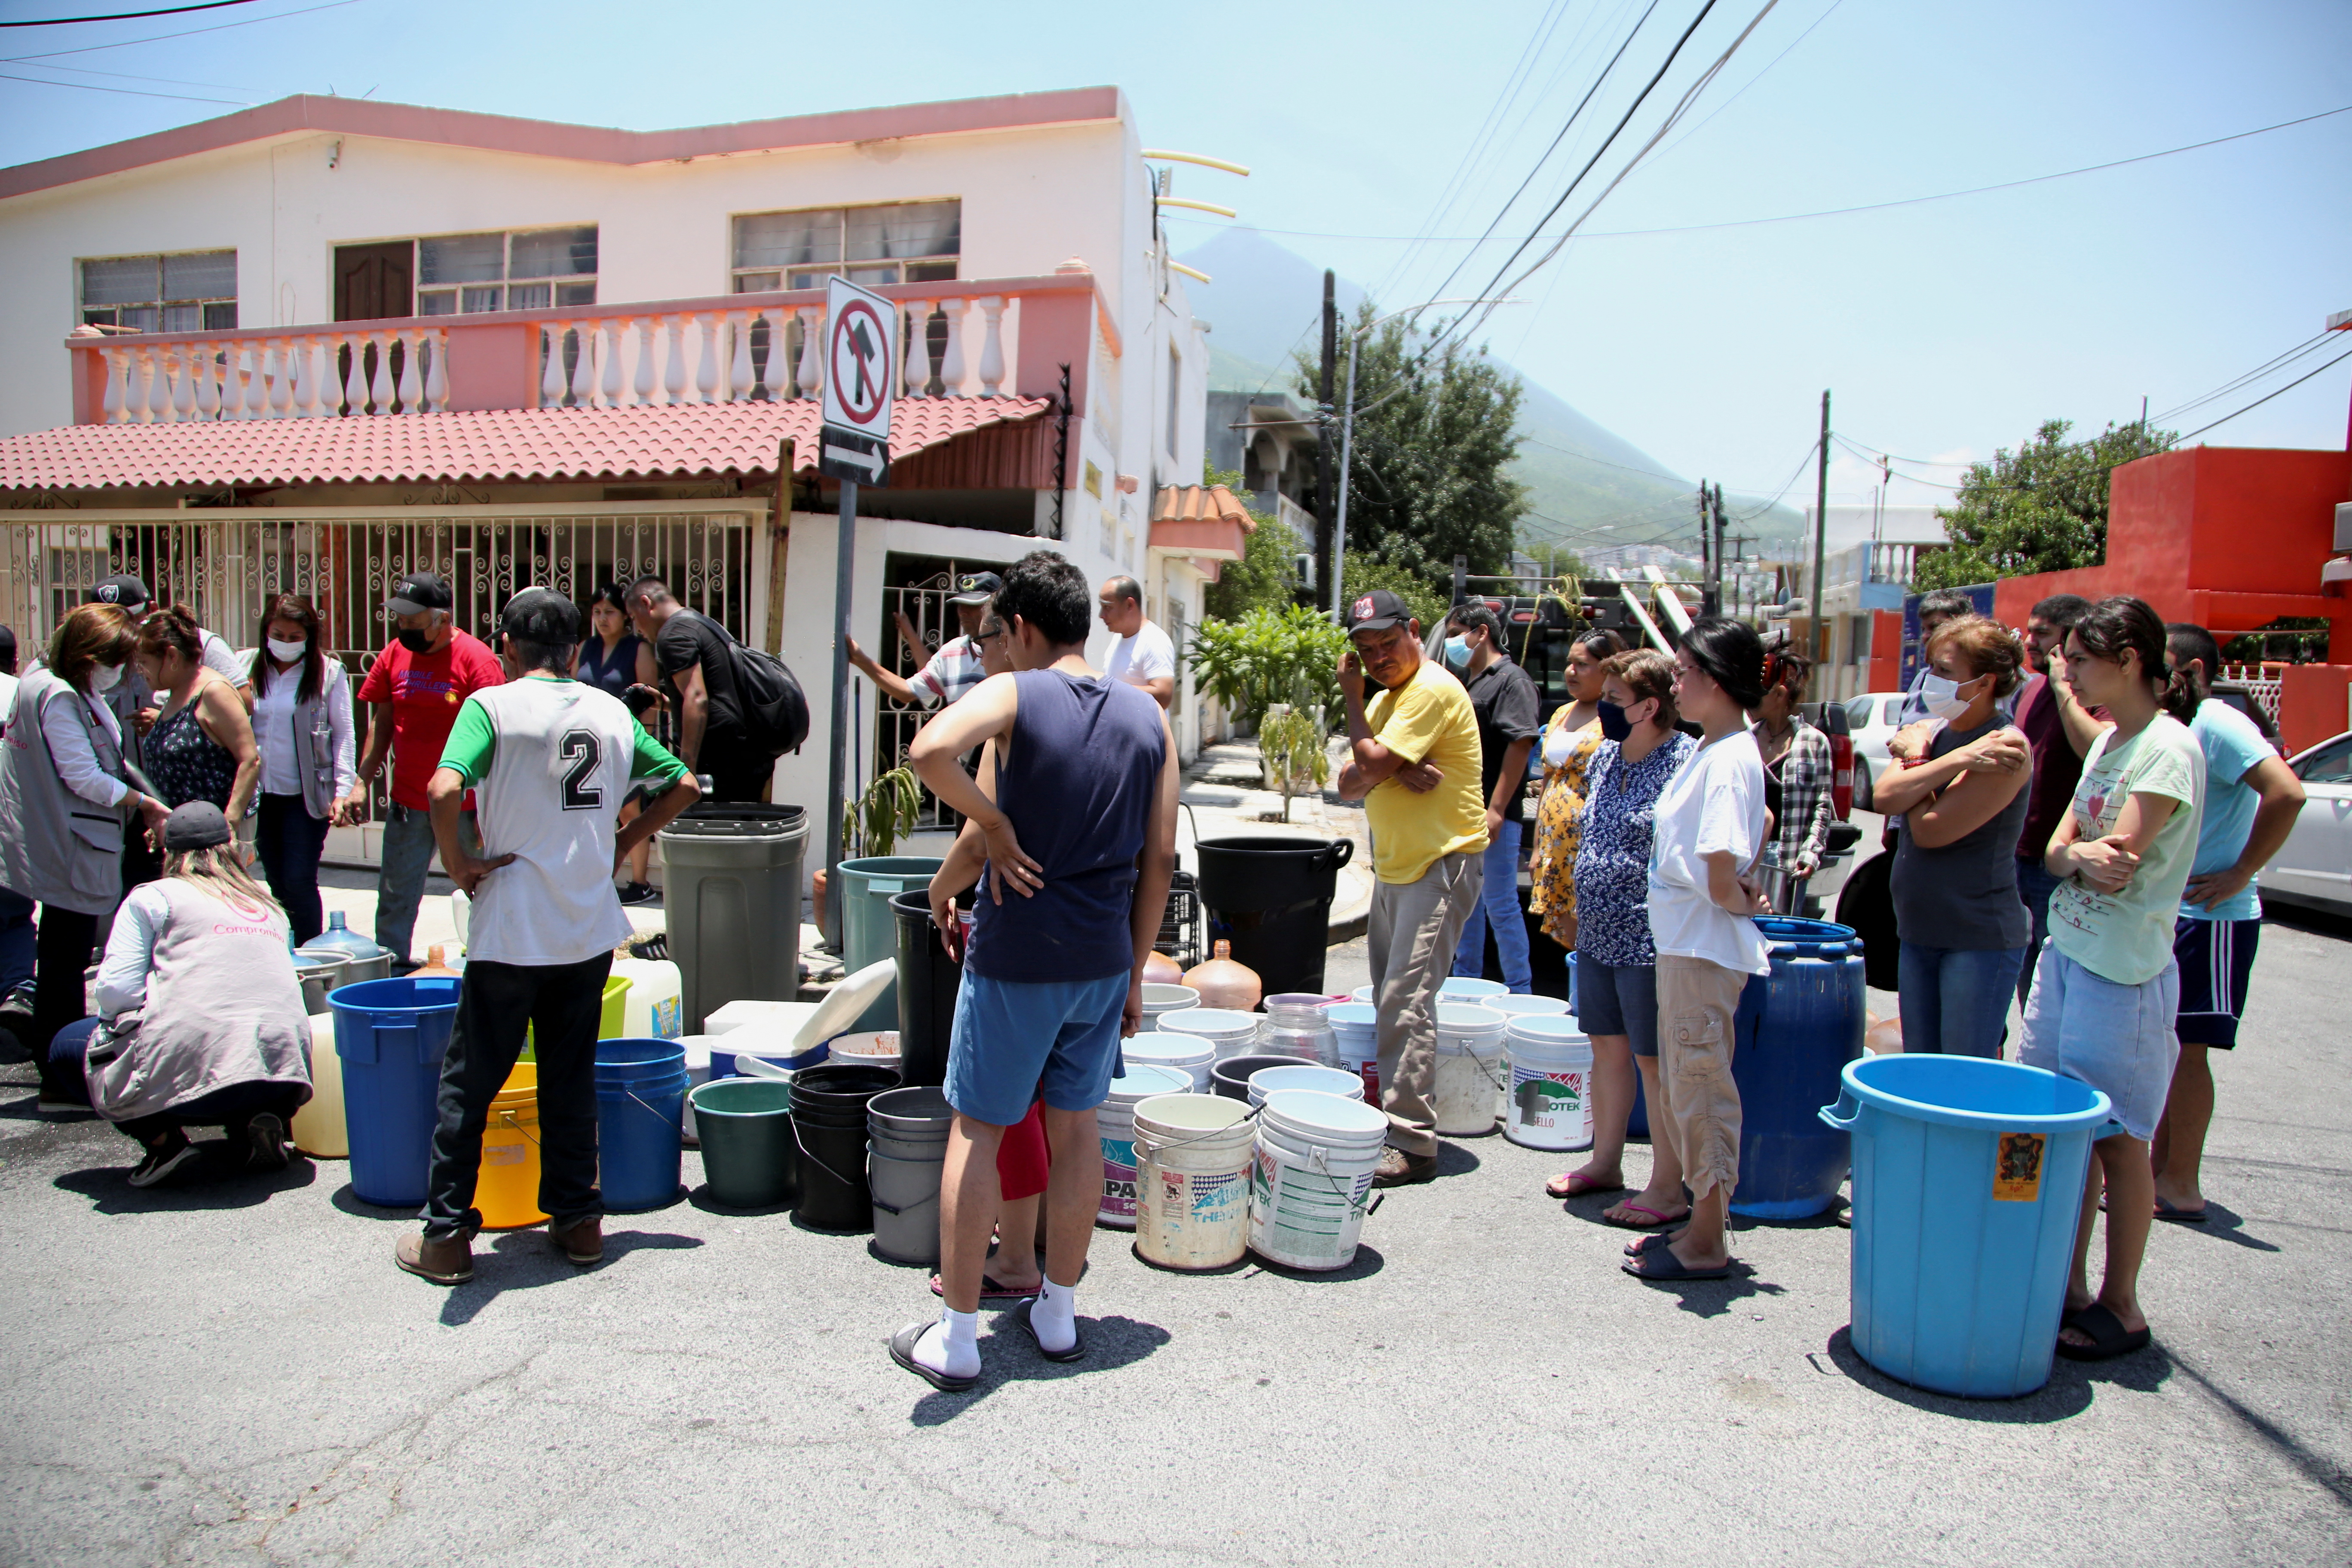 Residents wait for the water truck to arrive at La Hacienda neighborhood in Guadalupe, in Nuevo Leon state, Mexico June 11, 2022. REUTERS/Jorge Mendoza